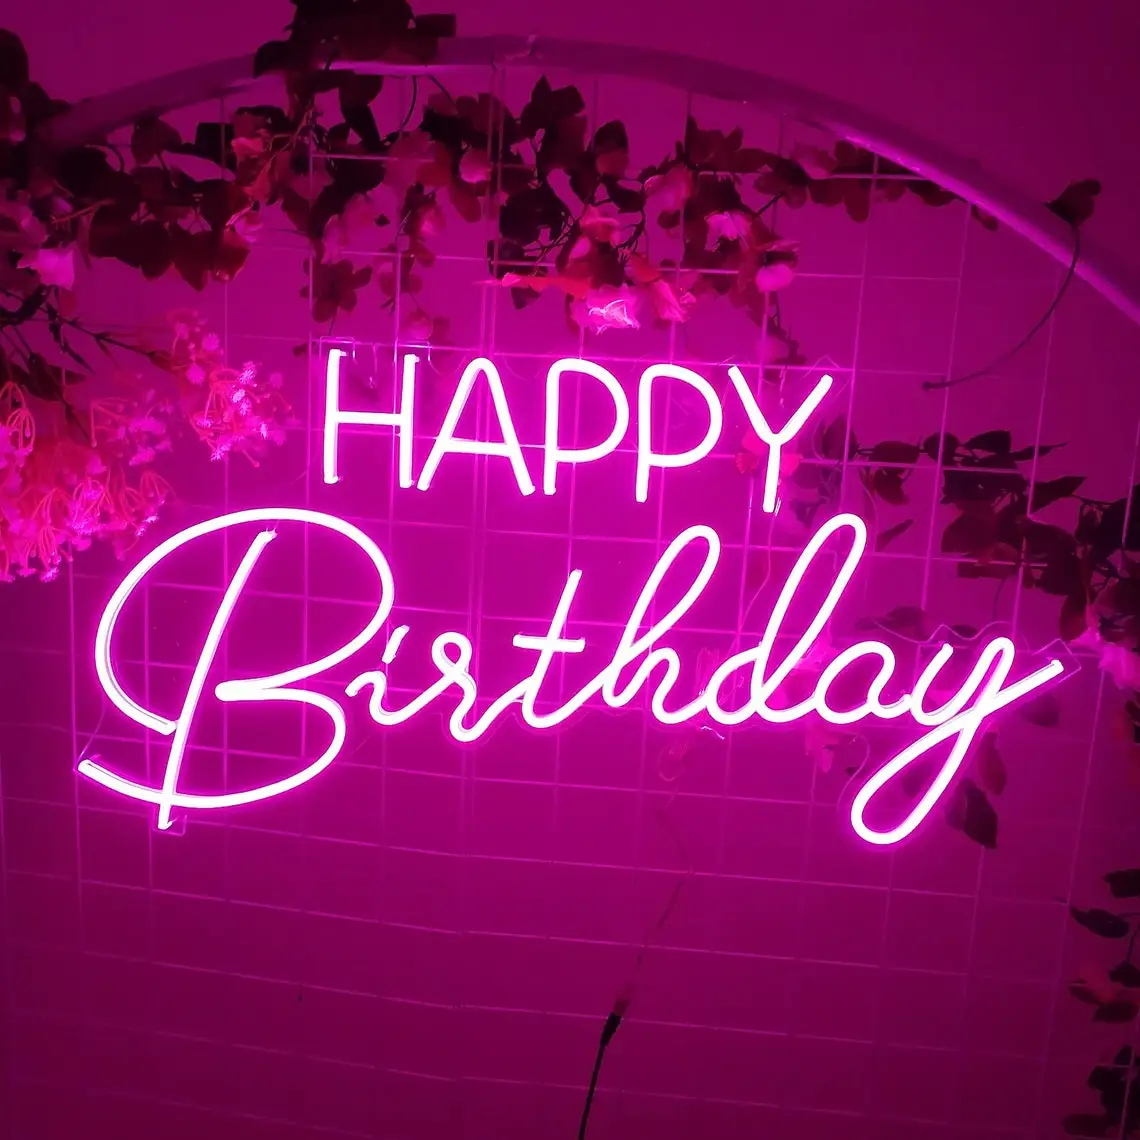 Happy Birthday Neon Sign Lights Custom Party Art Decor Supplies Present Gender Reveal For Baby Show Personalized Gifts